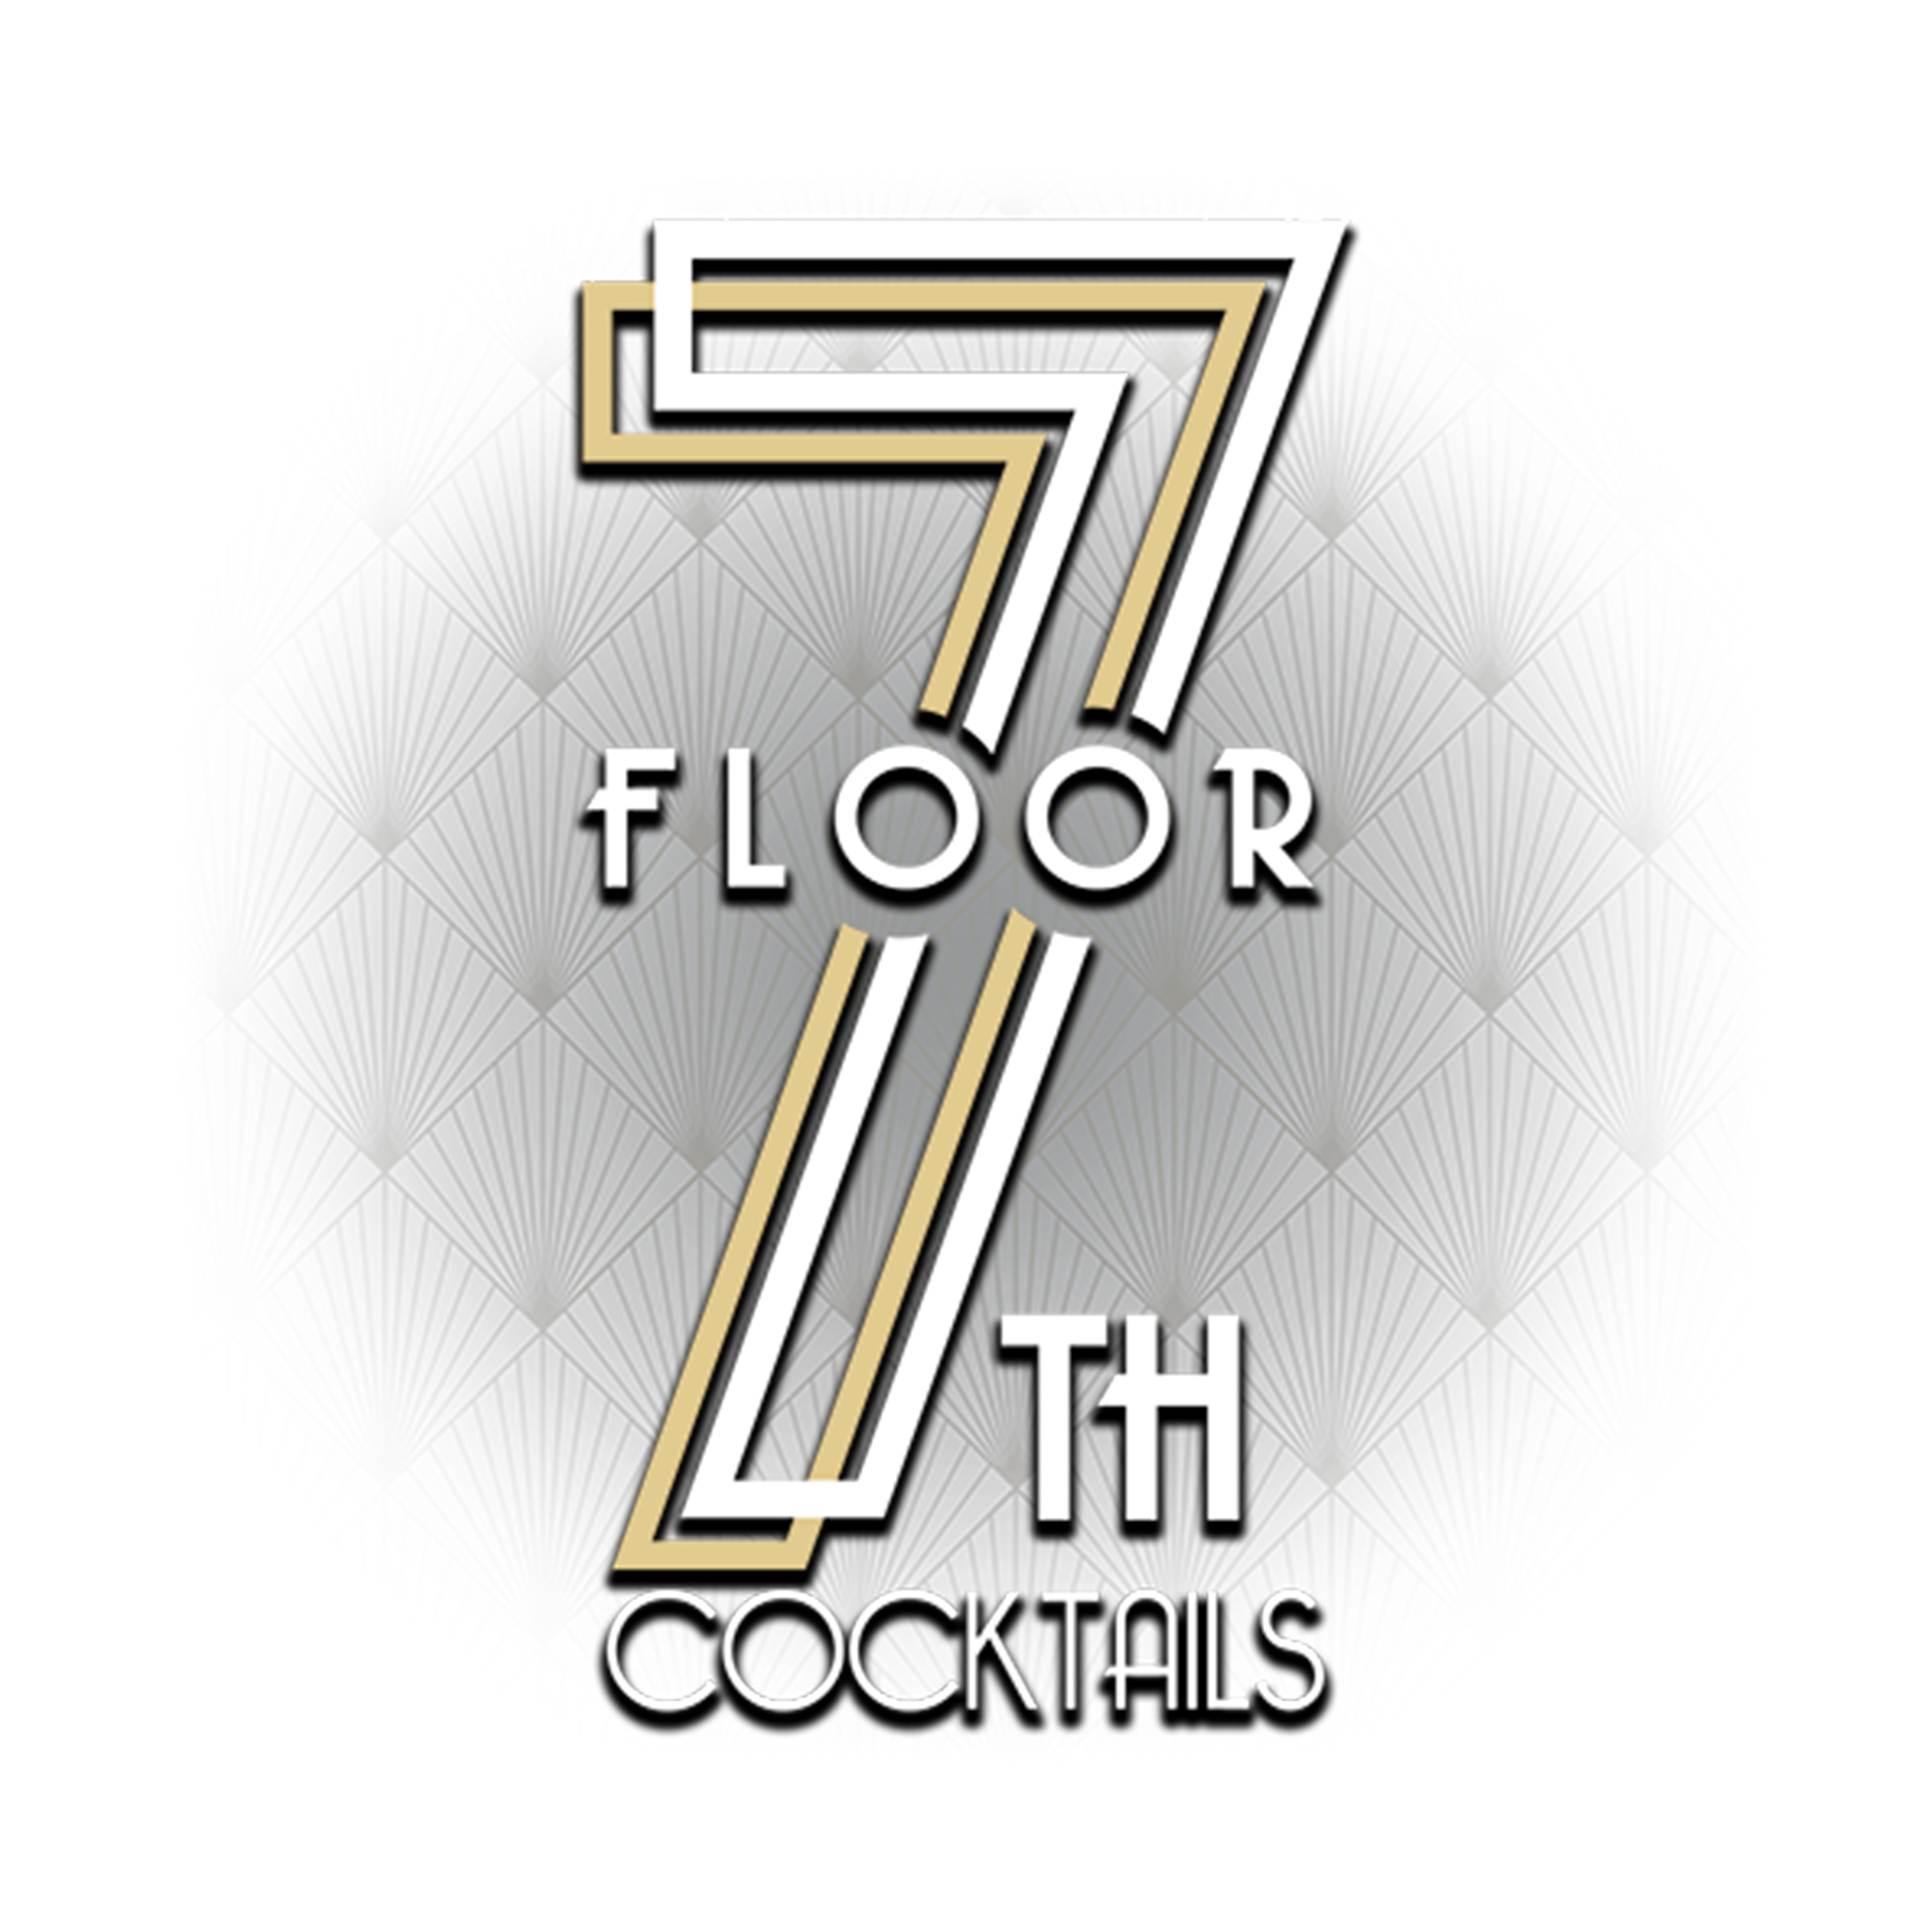 7th Floor Cocktails